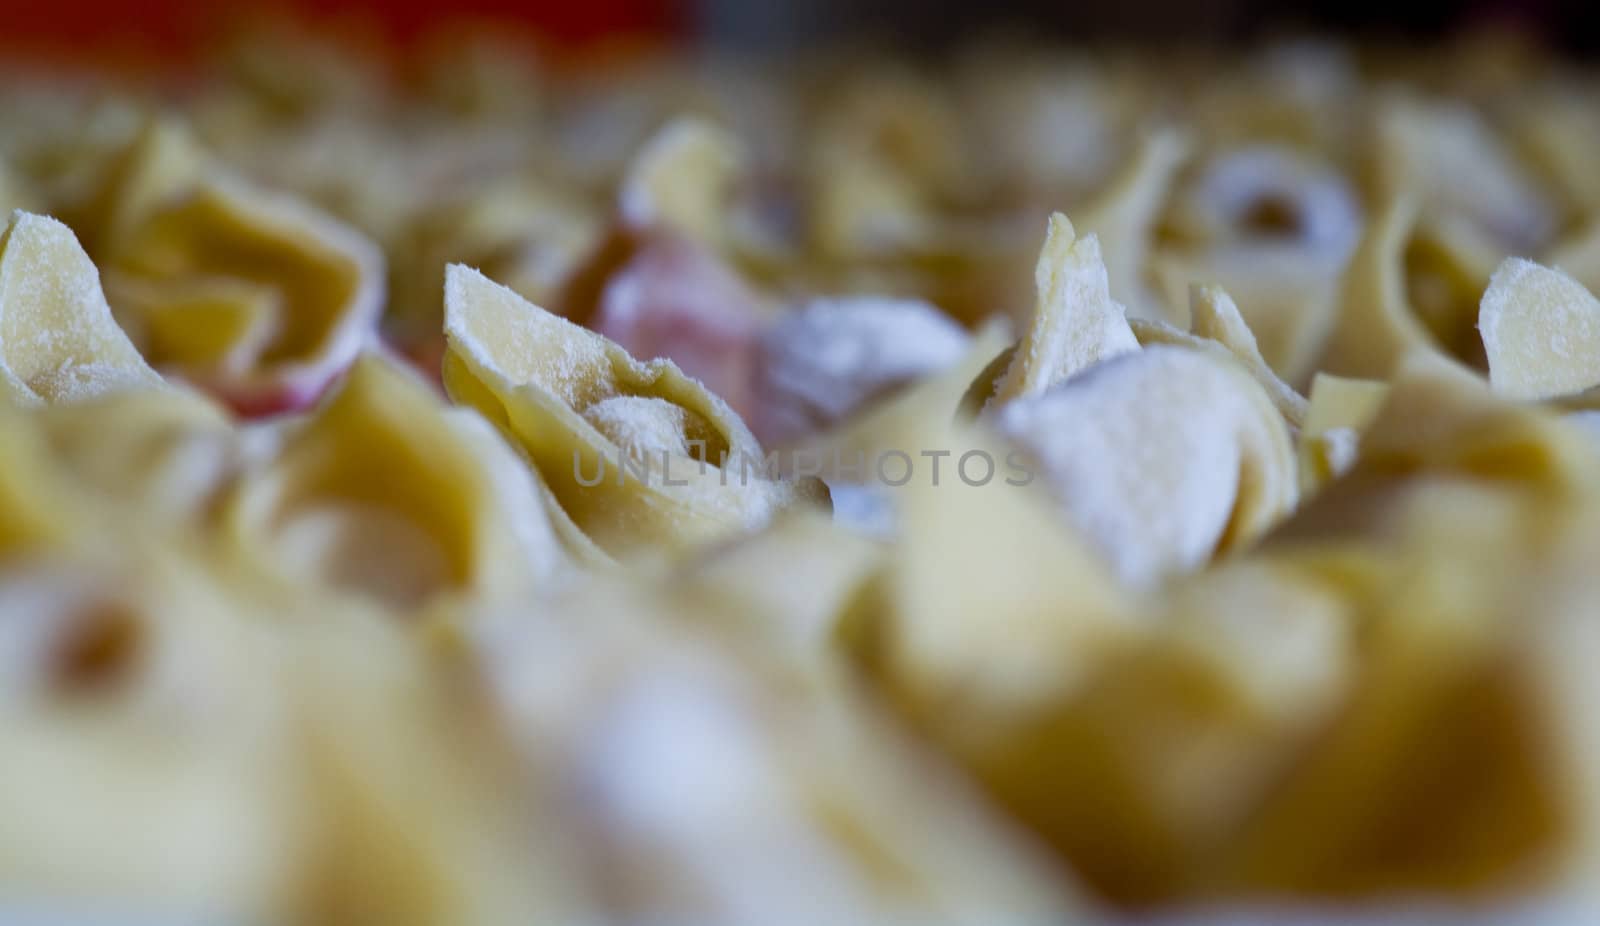 Making tortellini, following the Modena tradition, in Italy